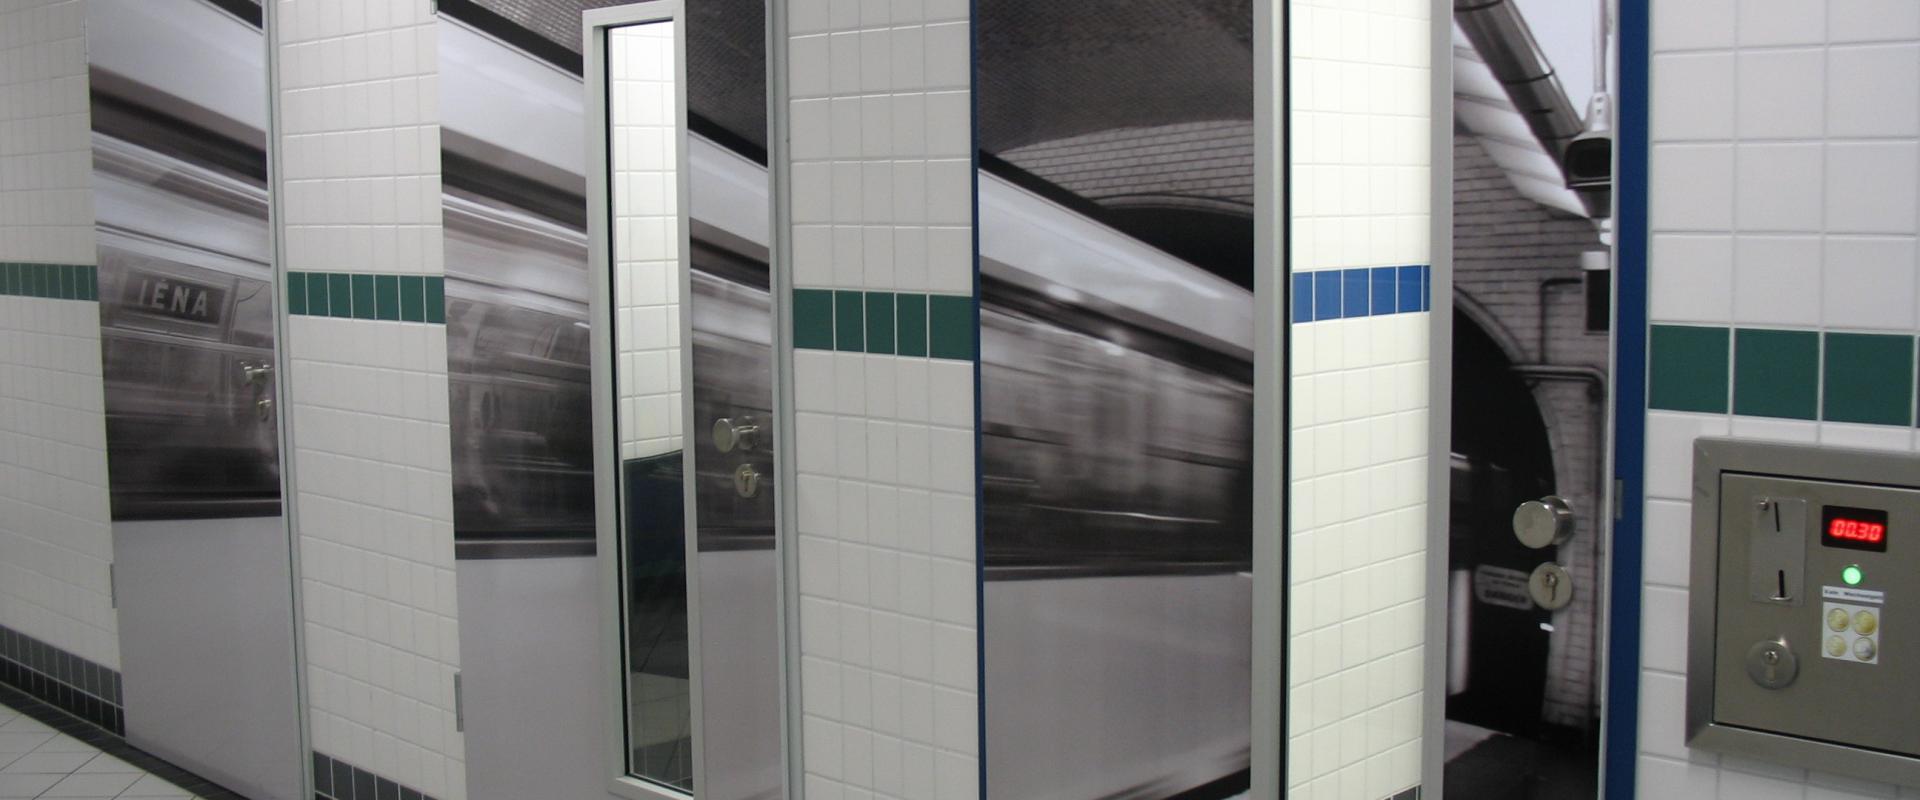 Interior view of the "subway-style" toilet at the market